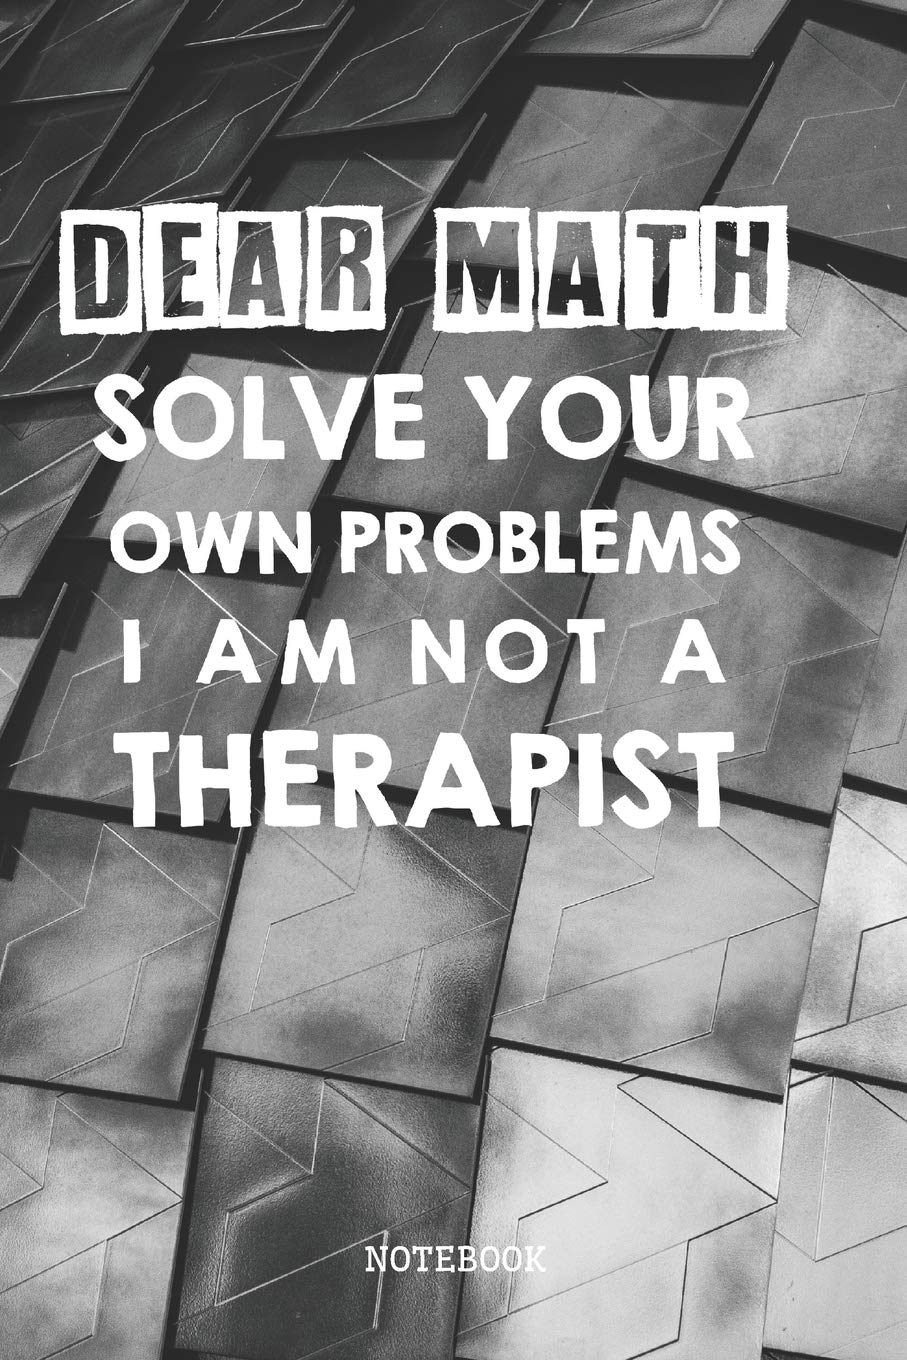 Dear Math Solve Your Own Problems I Am Not A Therapist: Funny and Sarcastic Mathematics Planner / Organizer / Lined Notebook (6 x 9): Thoughts, Clear: 9781092995832: Books